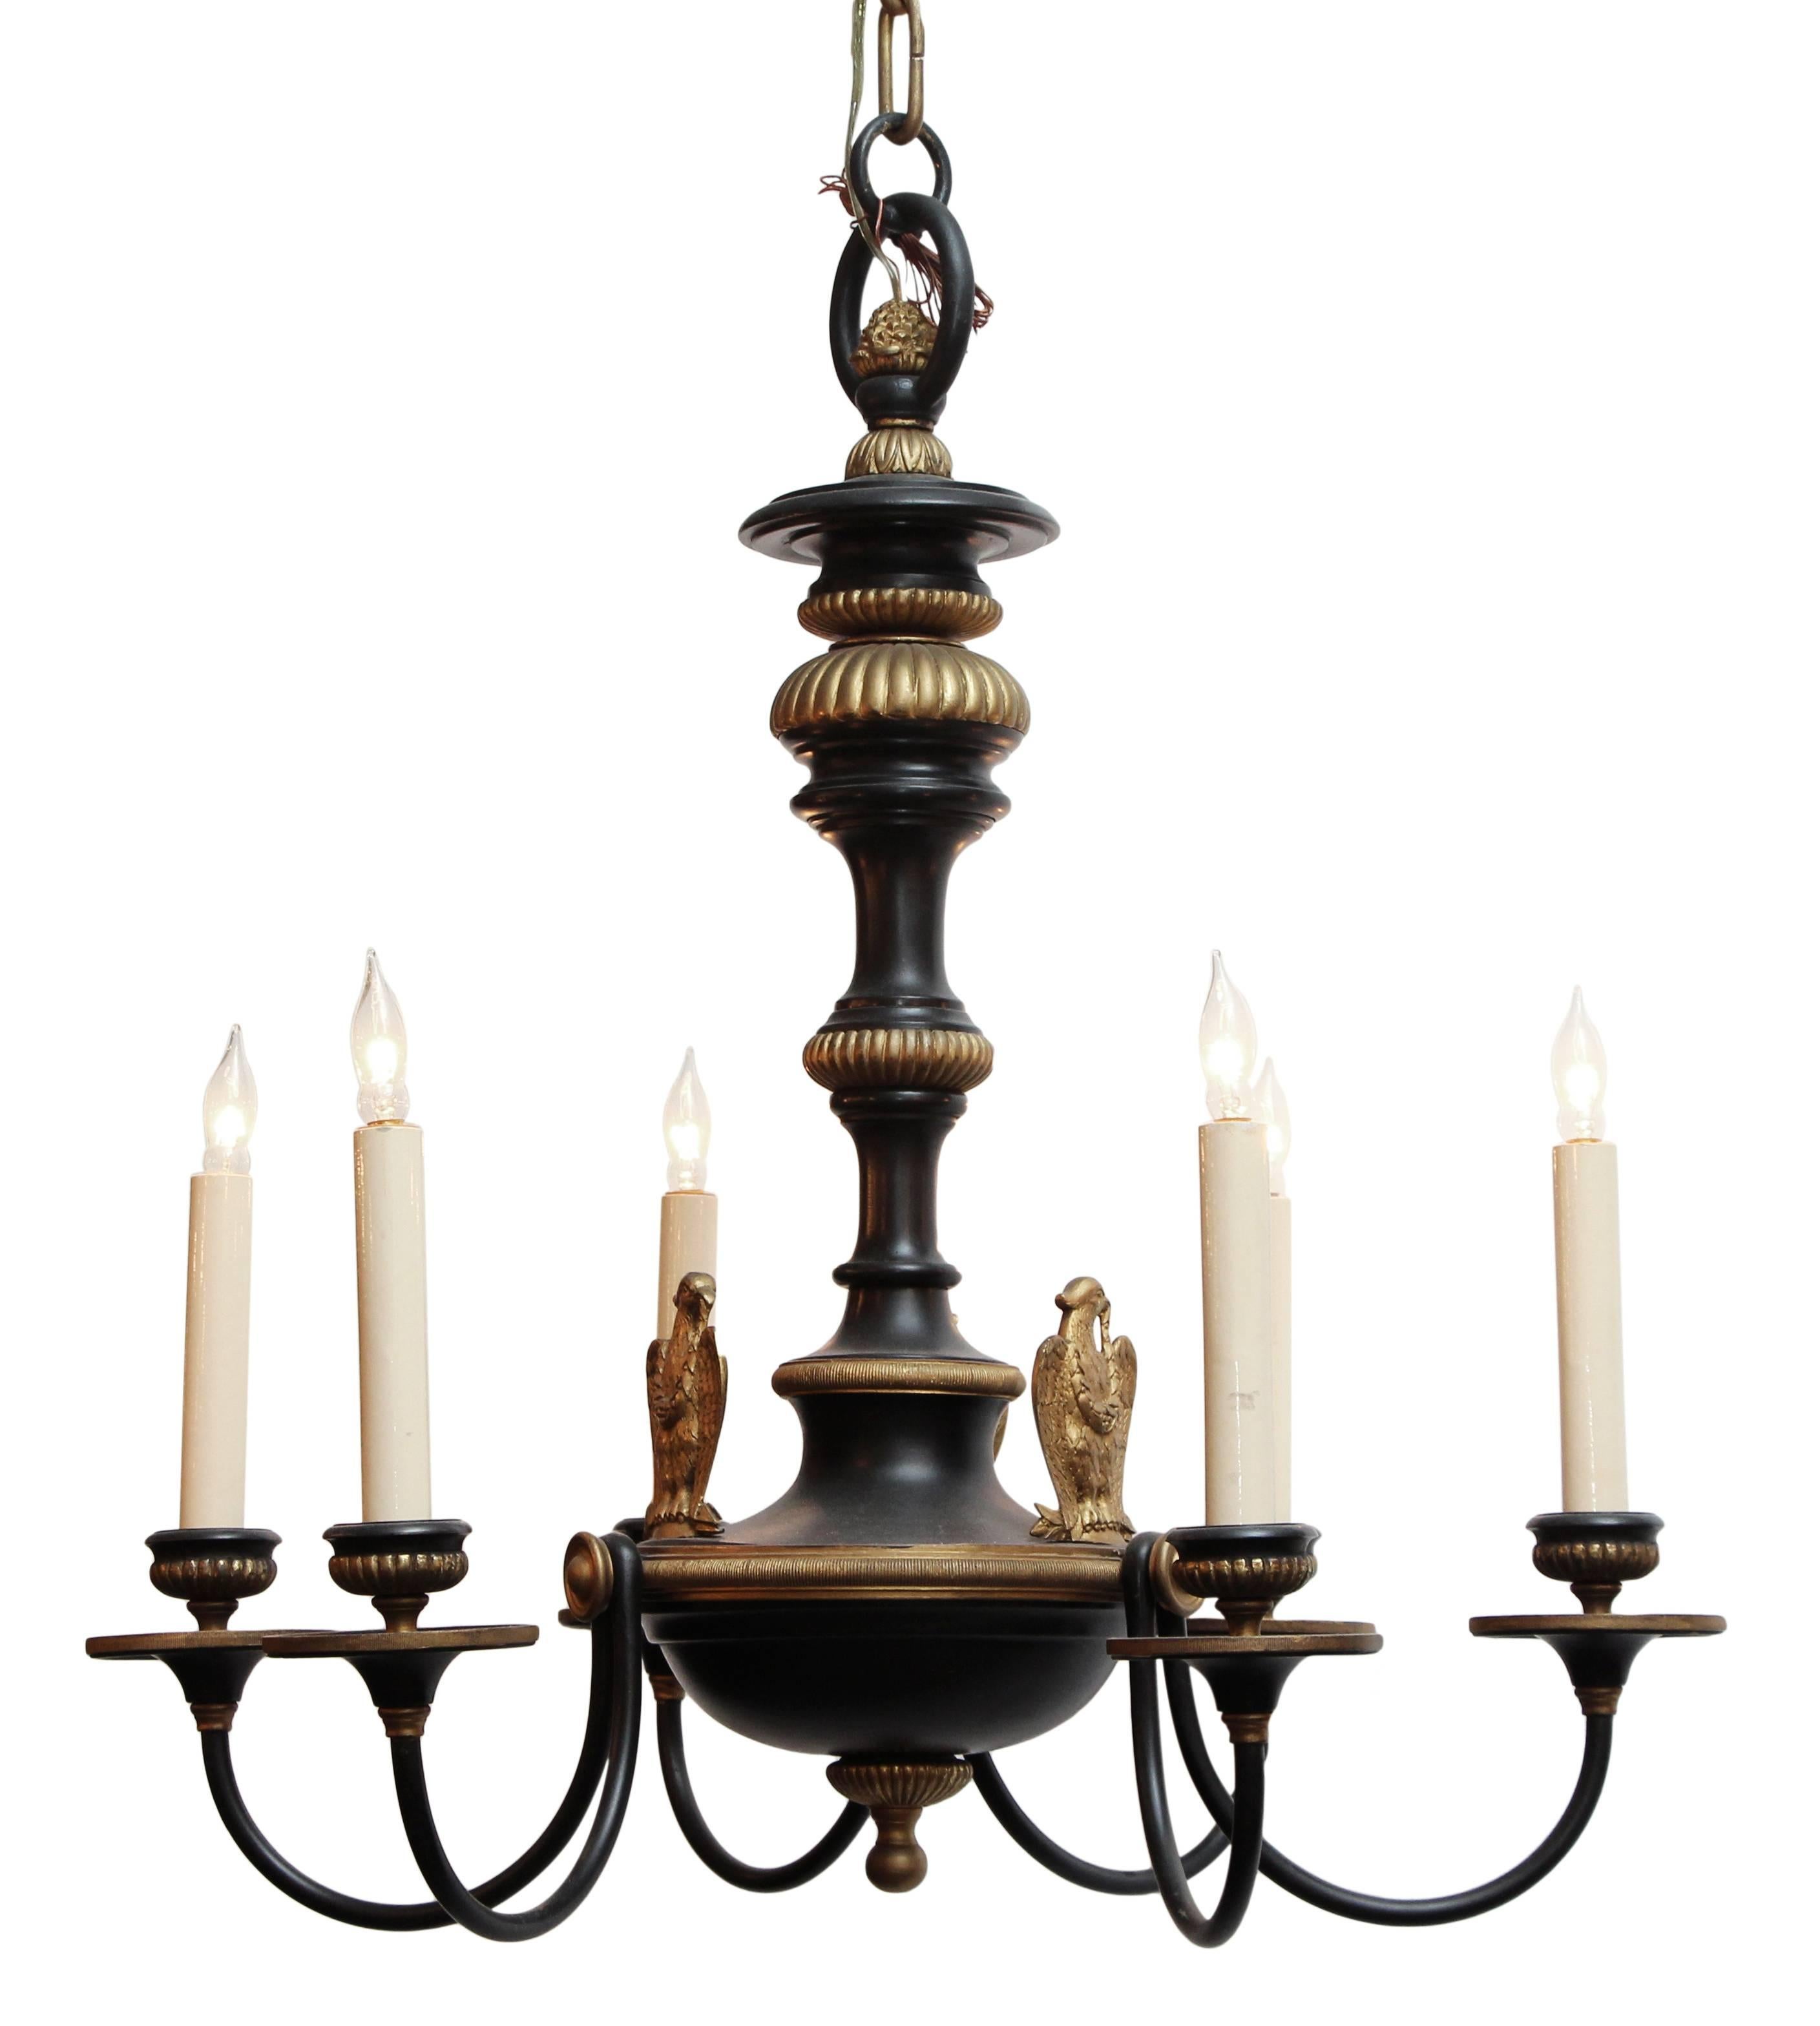 Federal style chandelier made by EF Caldwell of New York in 1910. It features figural eagles centered on the well of the fixture. This item can be viewed at our 5 East 16th St Union Square location in Manhattan.